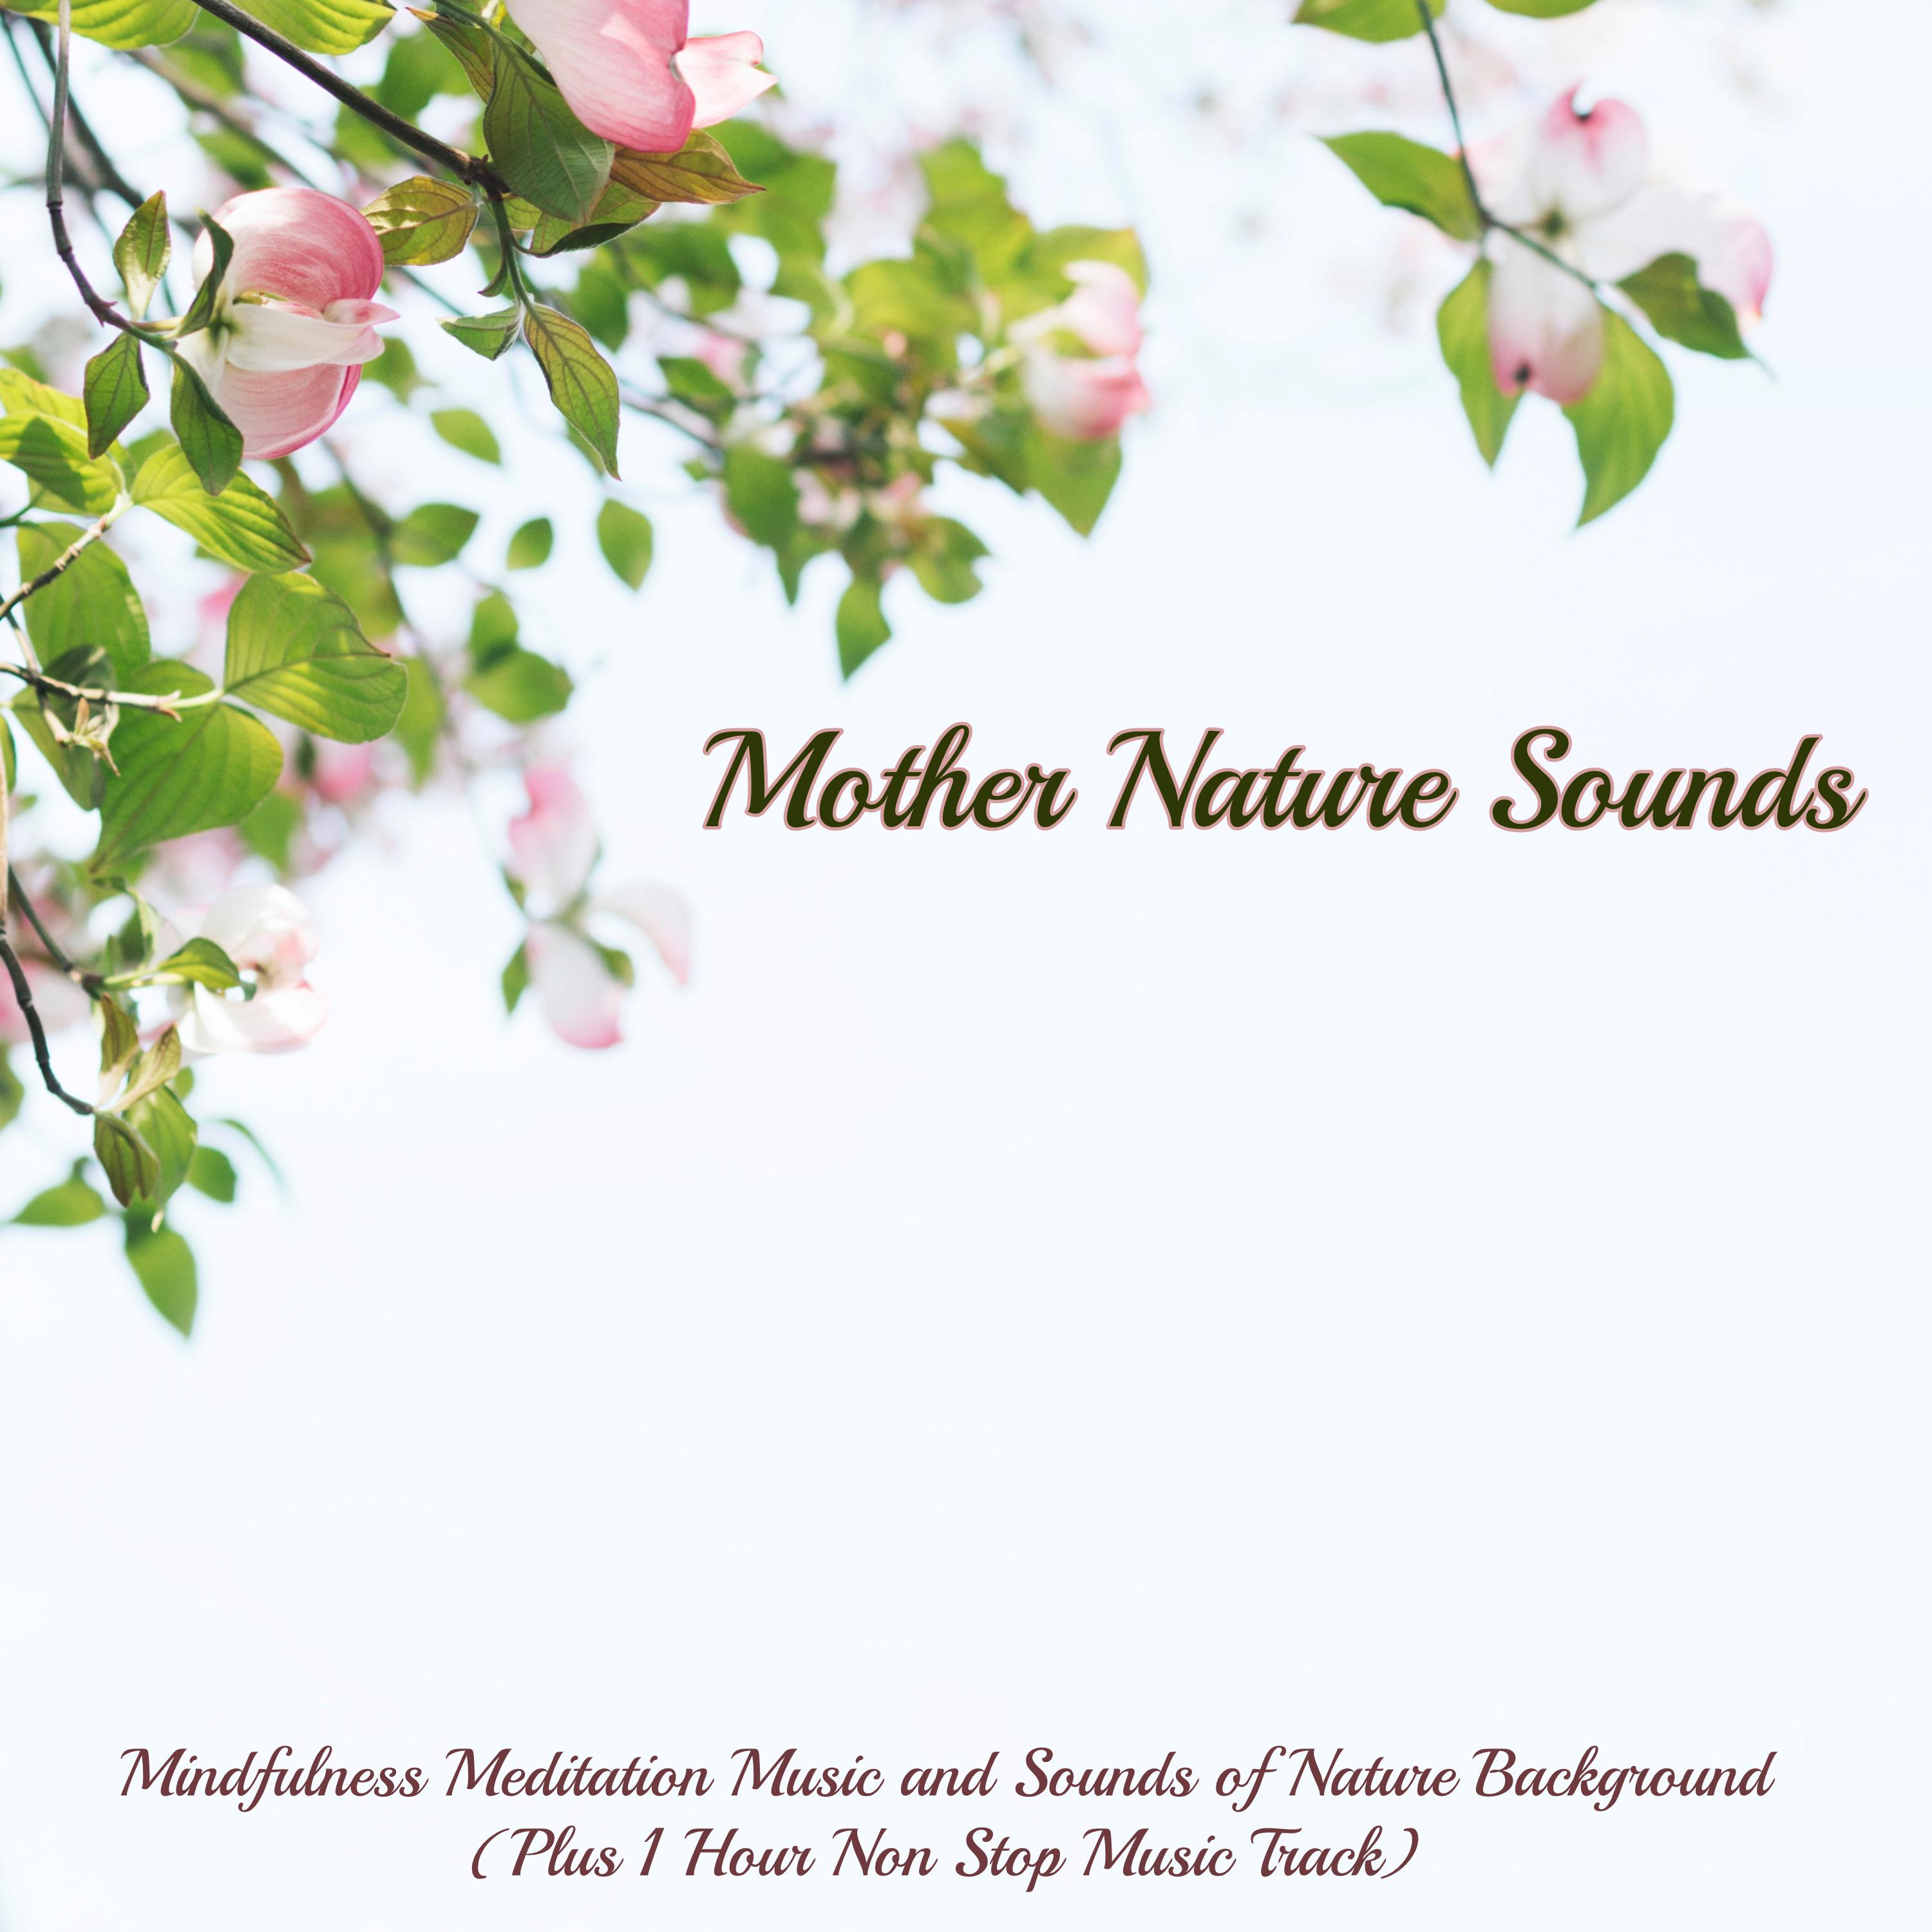 Mother Nature Sounds  Mindfulness Meditation Music and Sounds of Nature Background Plus 1 Hour Non Stop Music Track